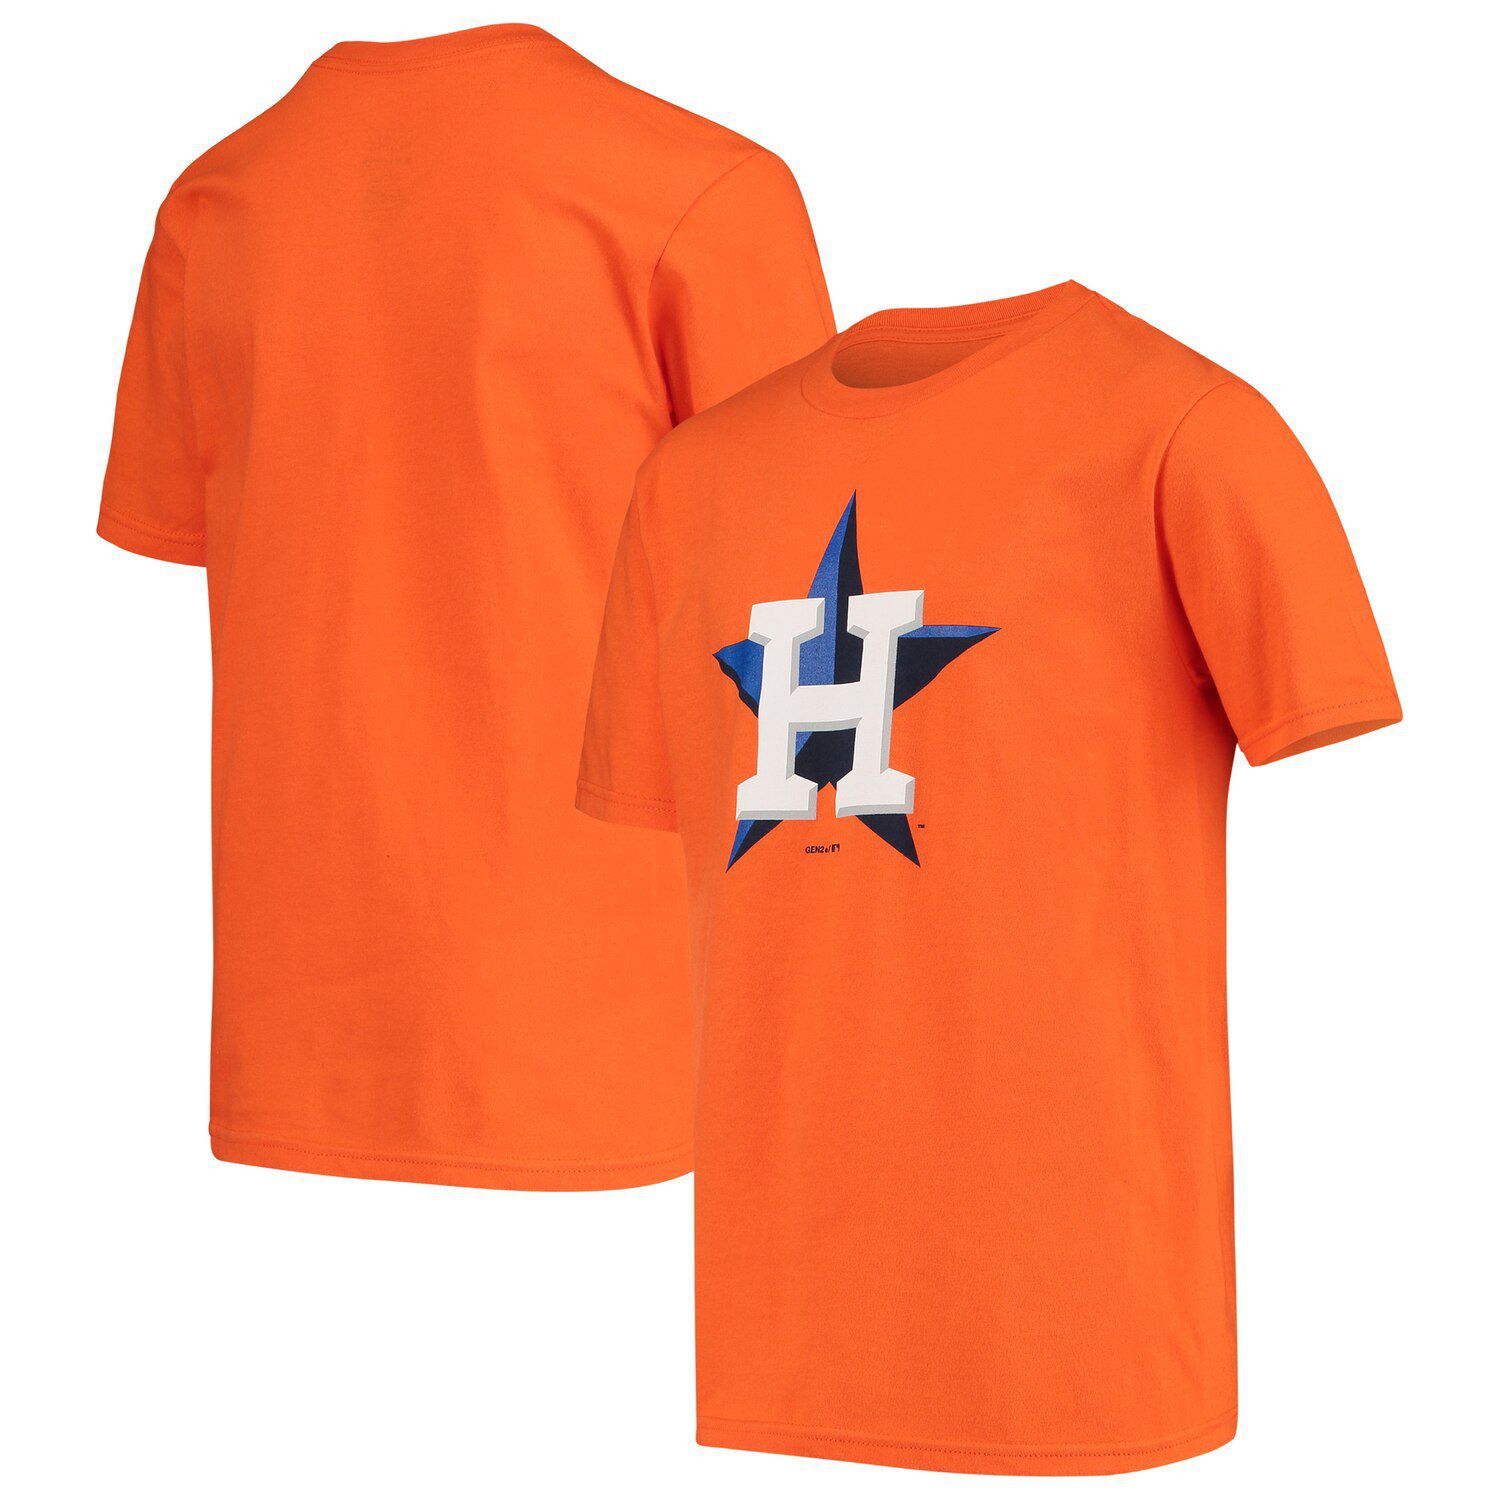 houston astros youth jersey